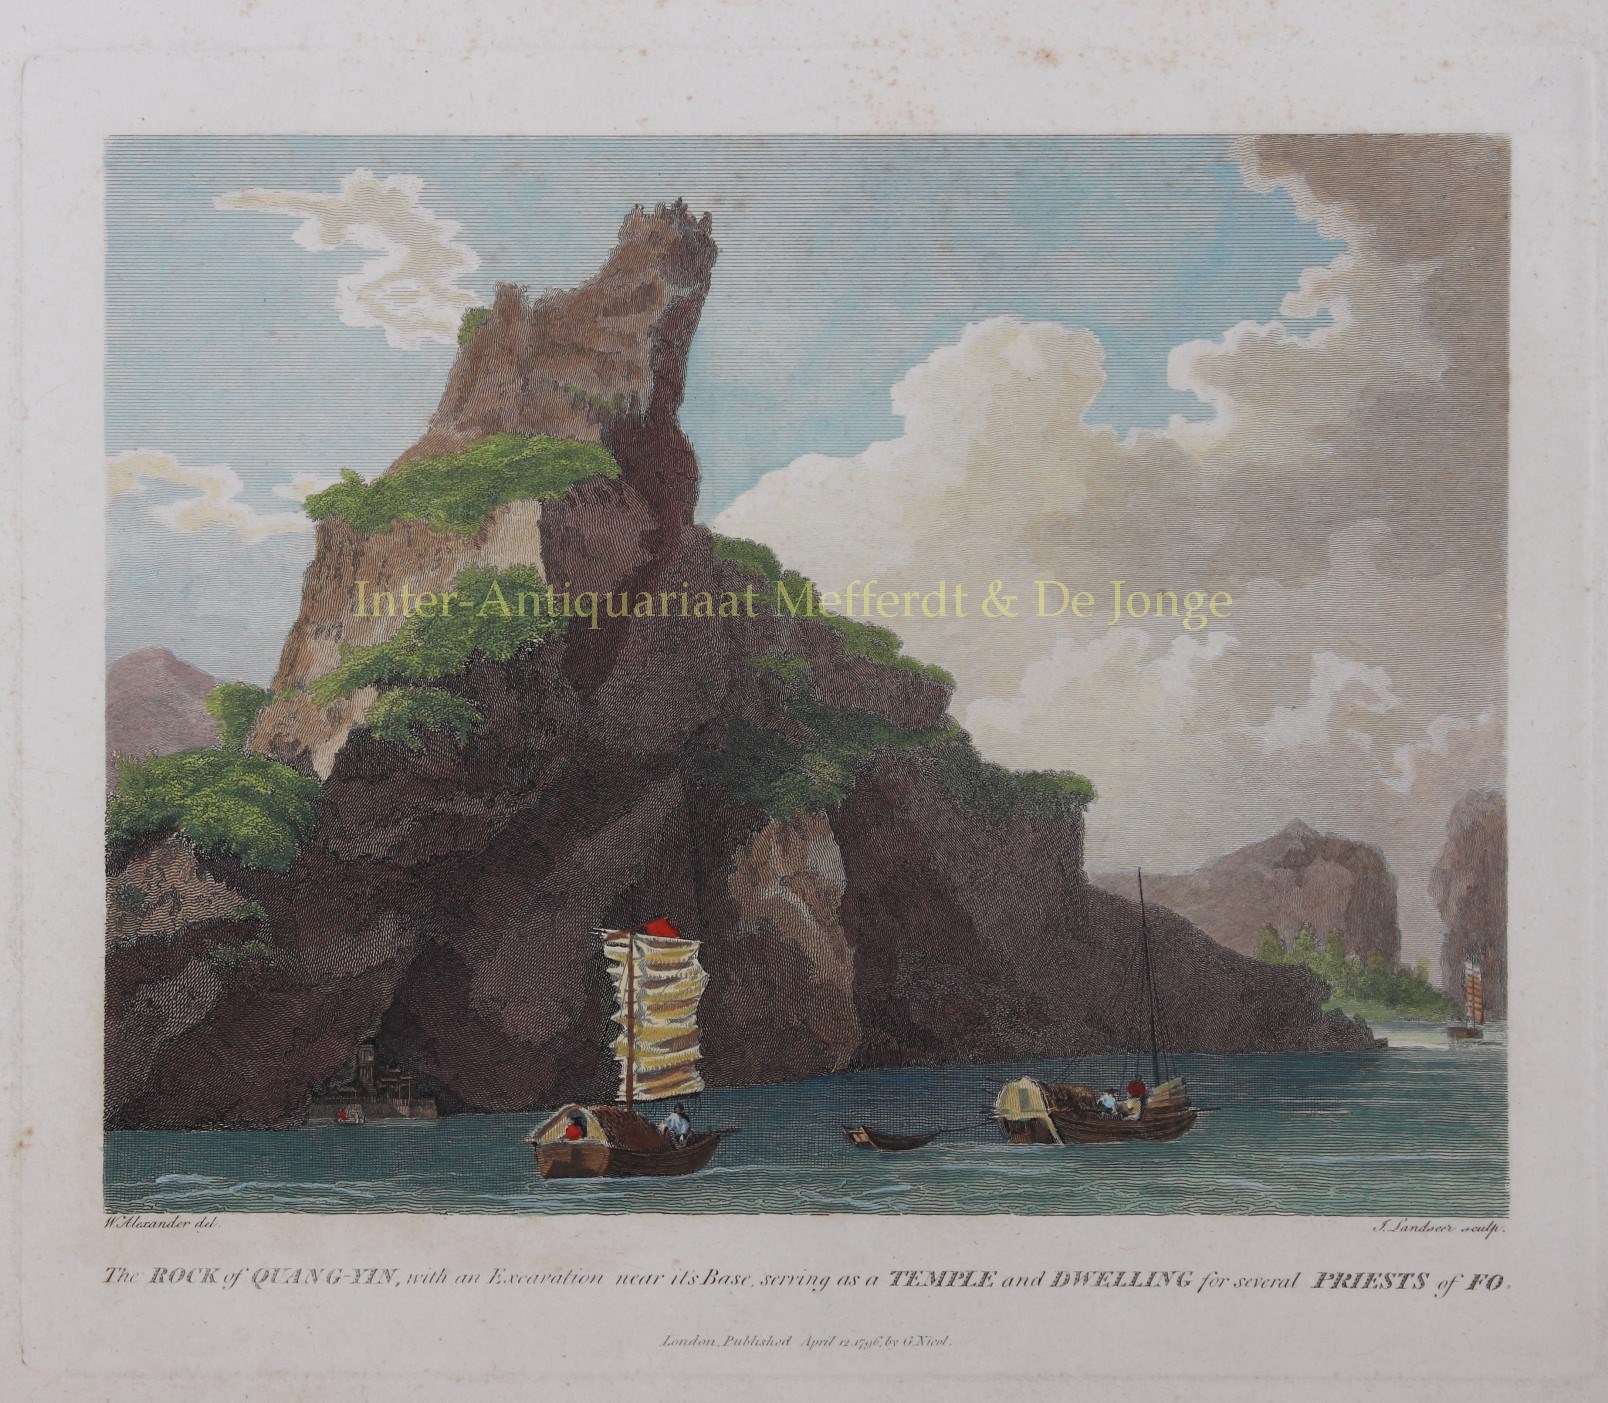 Alexander-- William (1767-1816) - China, Rock of Quang-Yin - after William Alexander, 1796